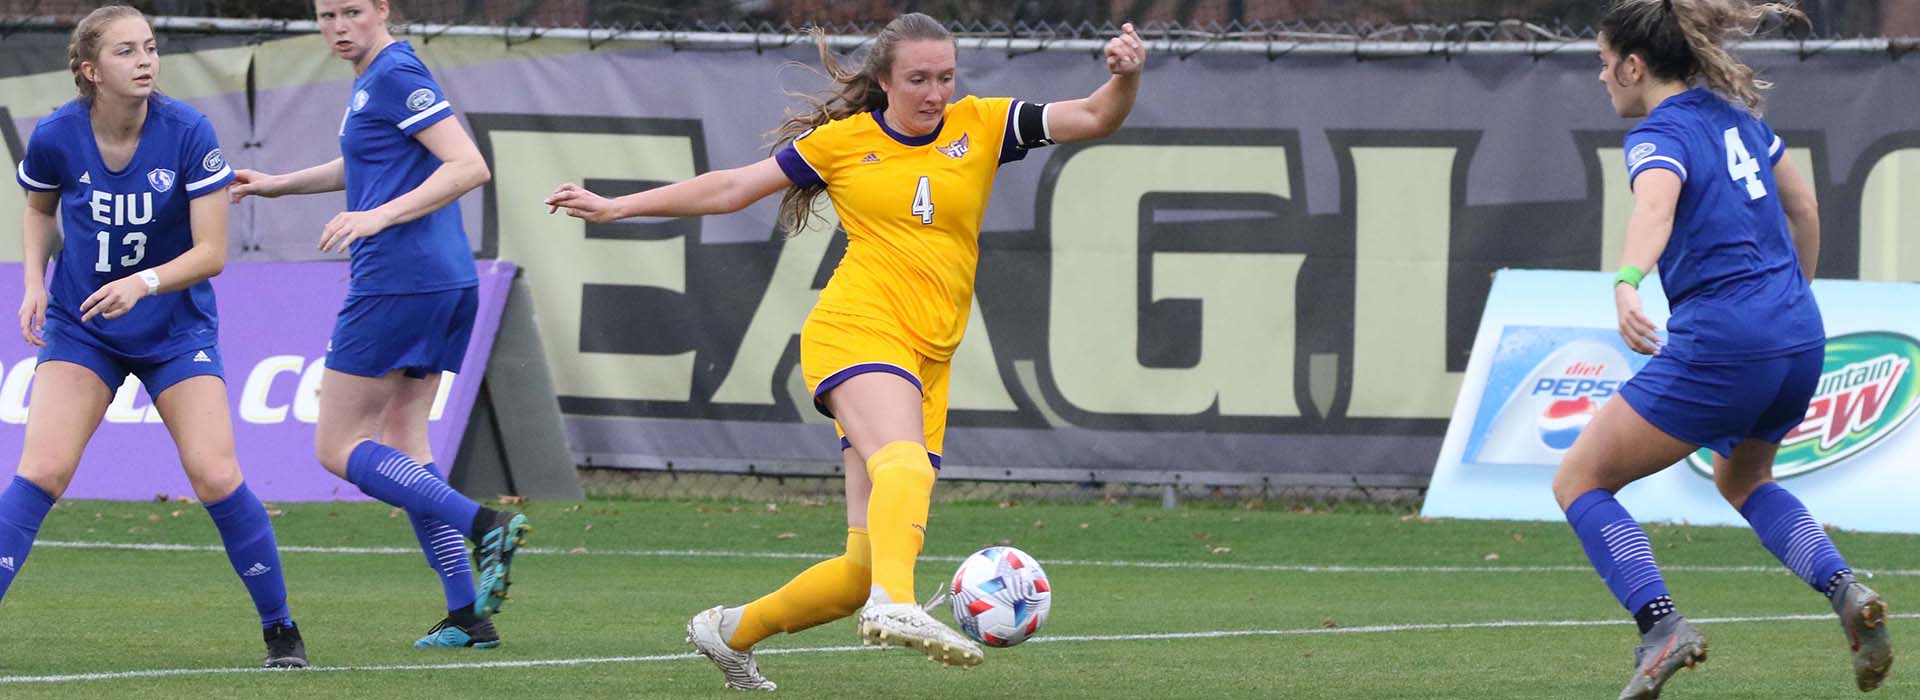 Golden Eagles welcome UT Martin to town for Friday night affair at Tech Soccer Field